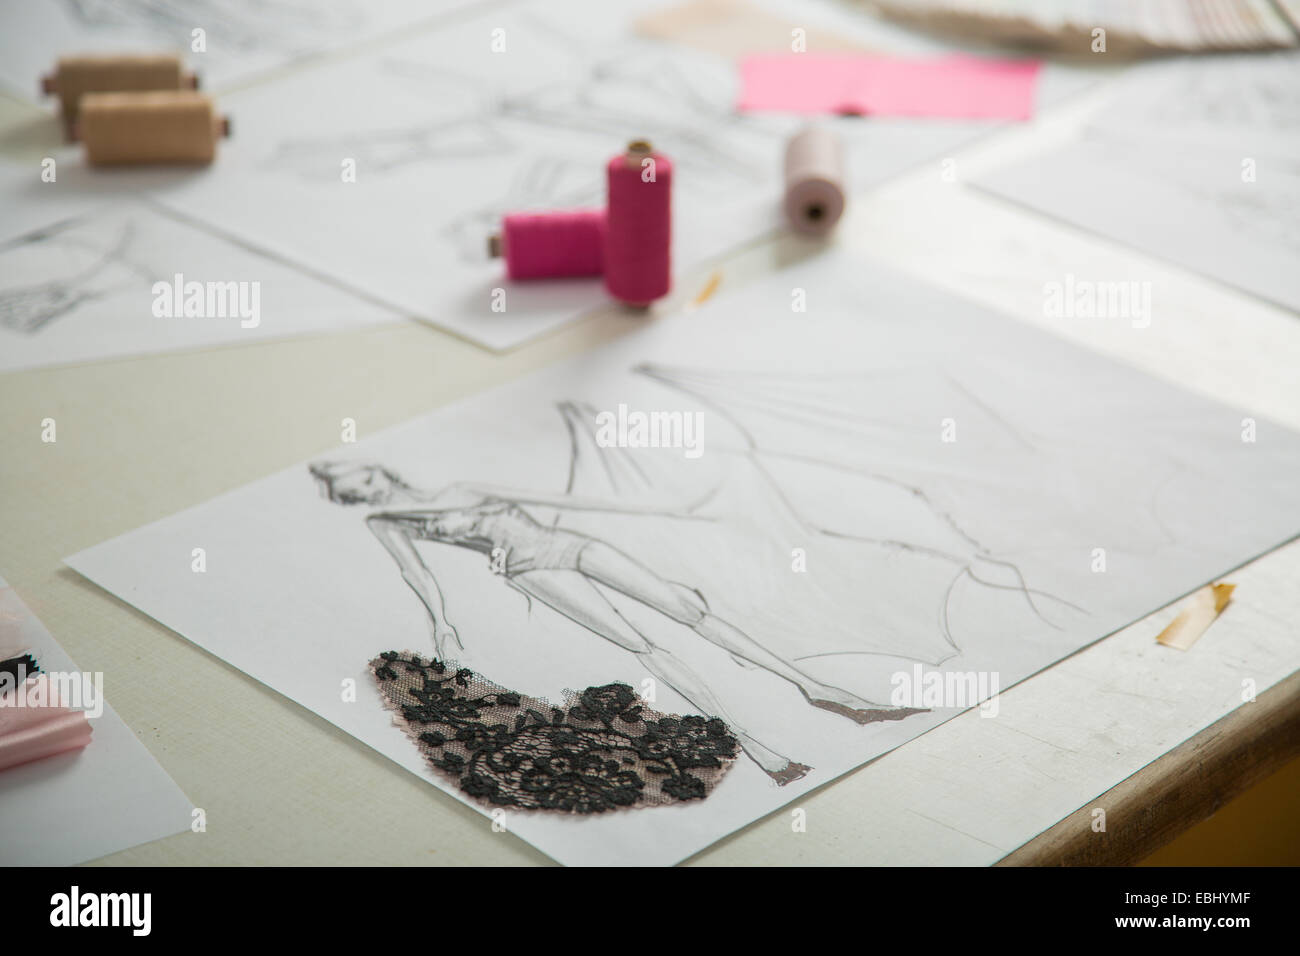 fashion designers, working in progress on tailor table Stock Photo